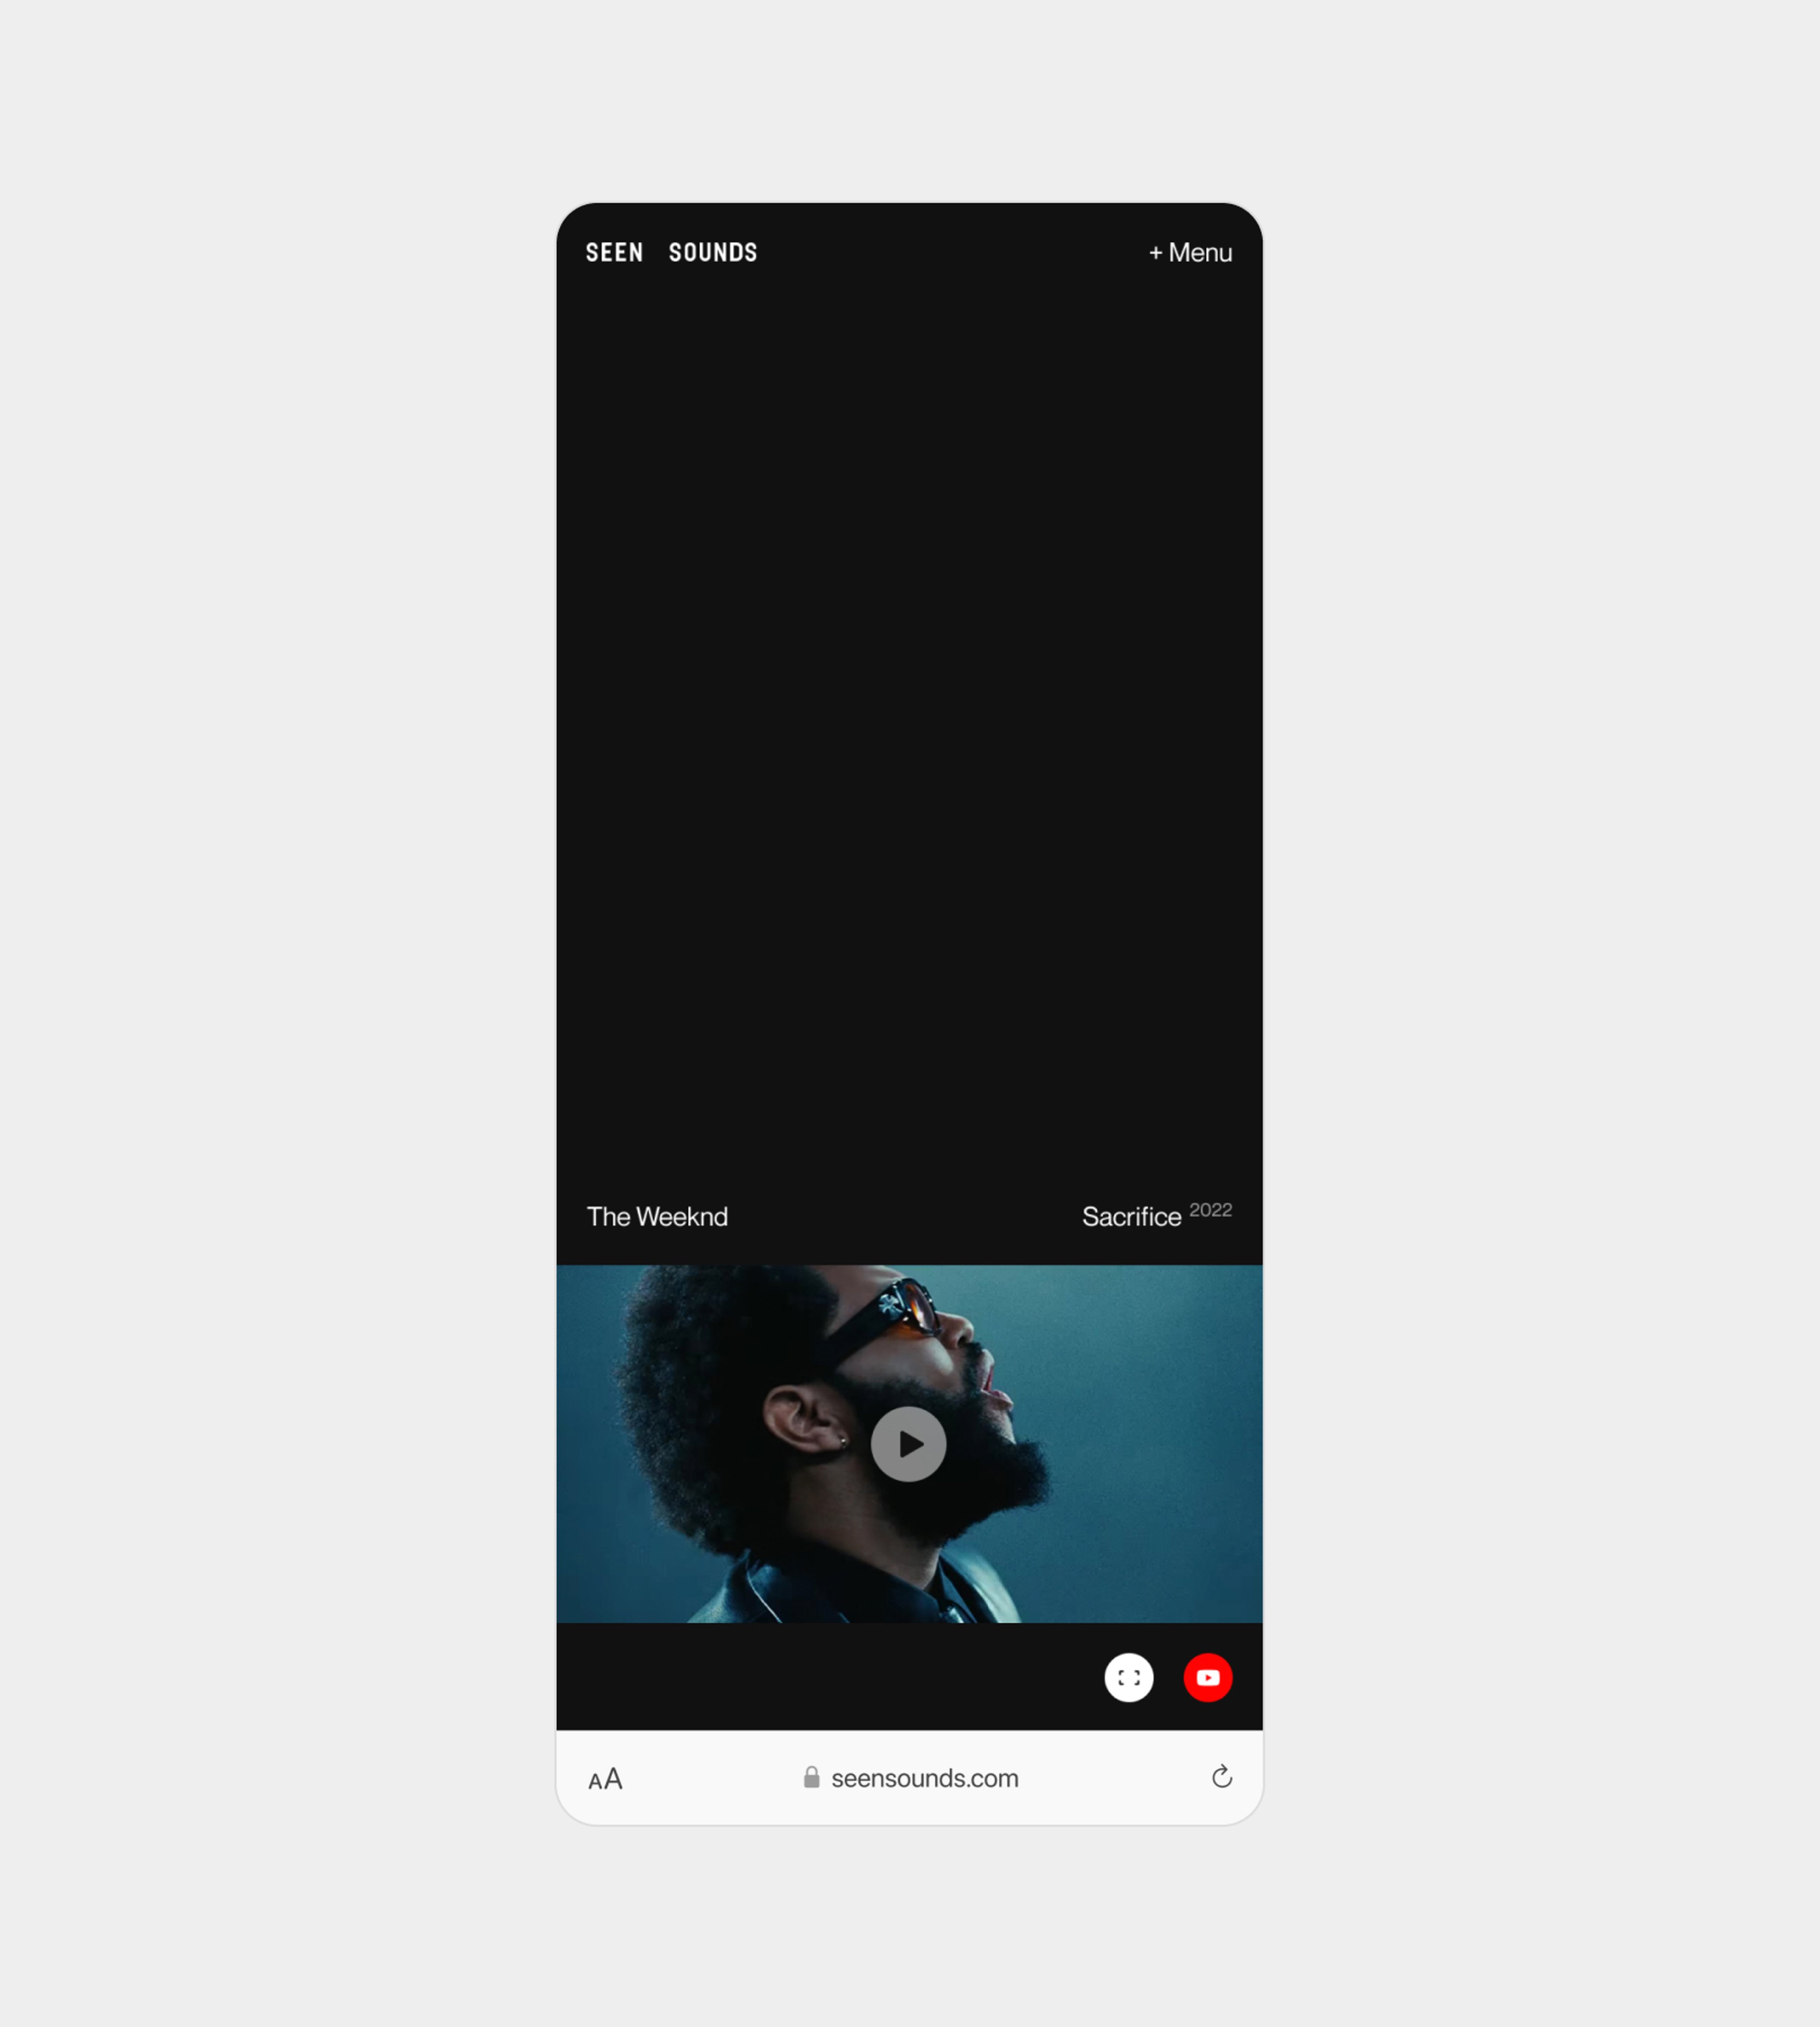 Image of mobile version of Seen Sounds music video page showing The Weeknd's video for "Sacrifice". 